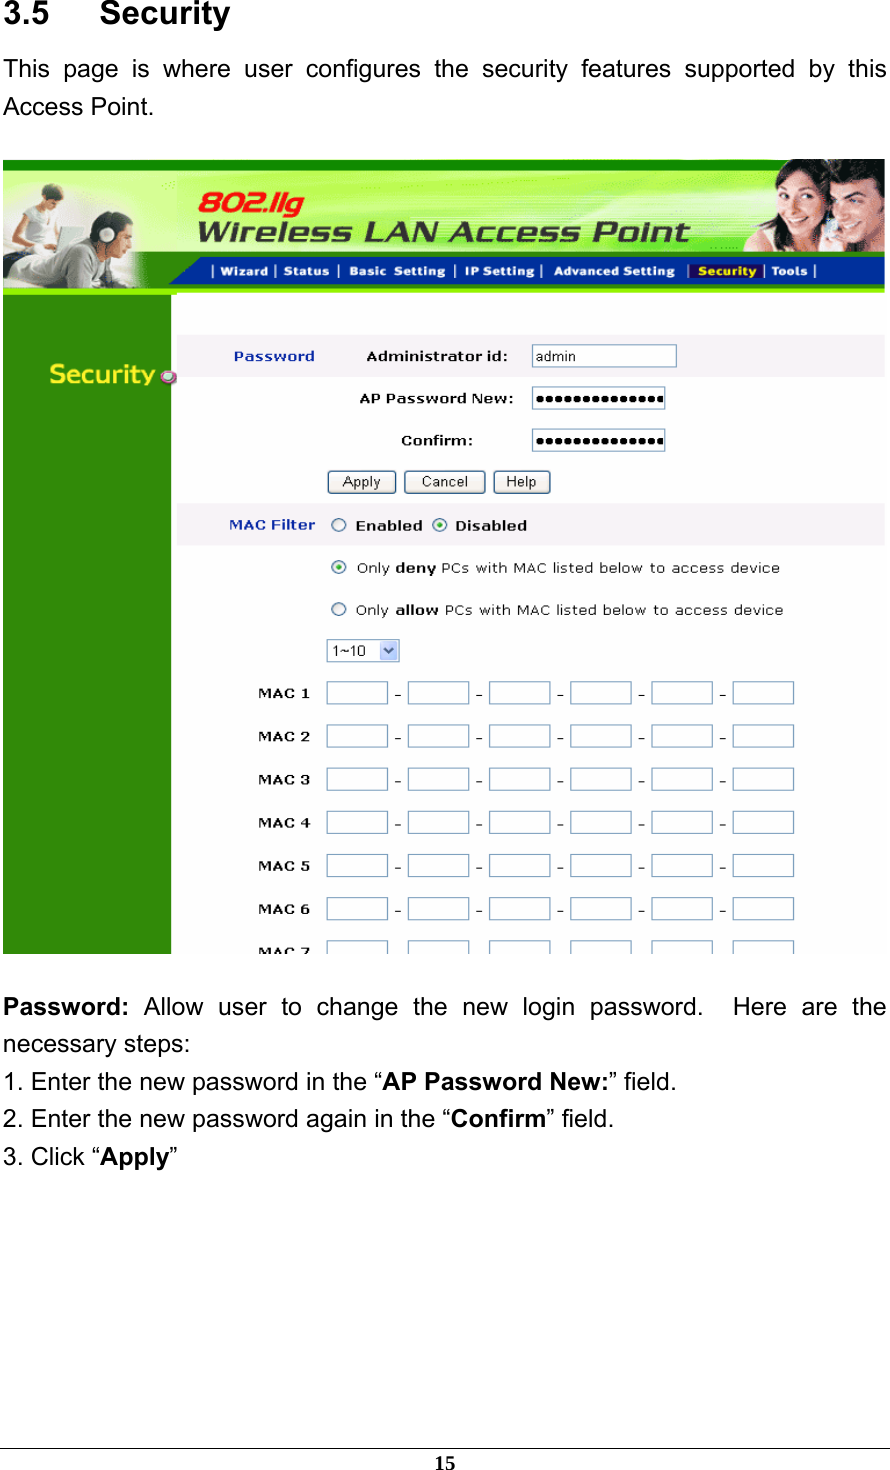 3.5   Security This page is where user configures the security features supported by this Access Point.  Password:  Allow user to change the new login password.  Here are the necessary steps: 1. Enter the new password in the “AP Password New:” field. 2. Enter the new password again in the “Confirm” field. 3. Click “Apply”     15 